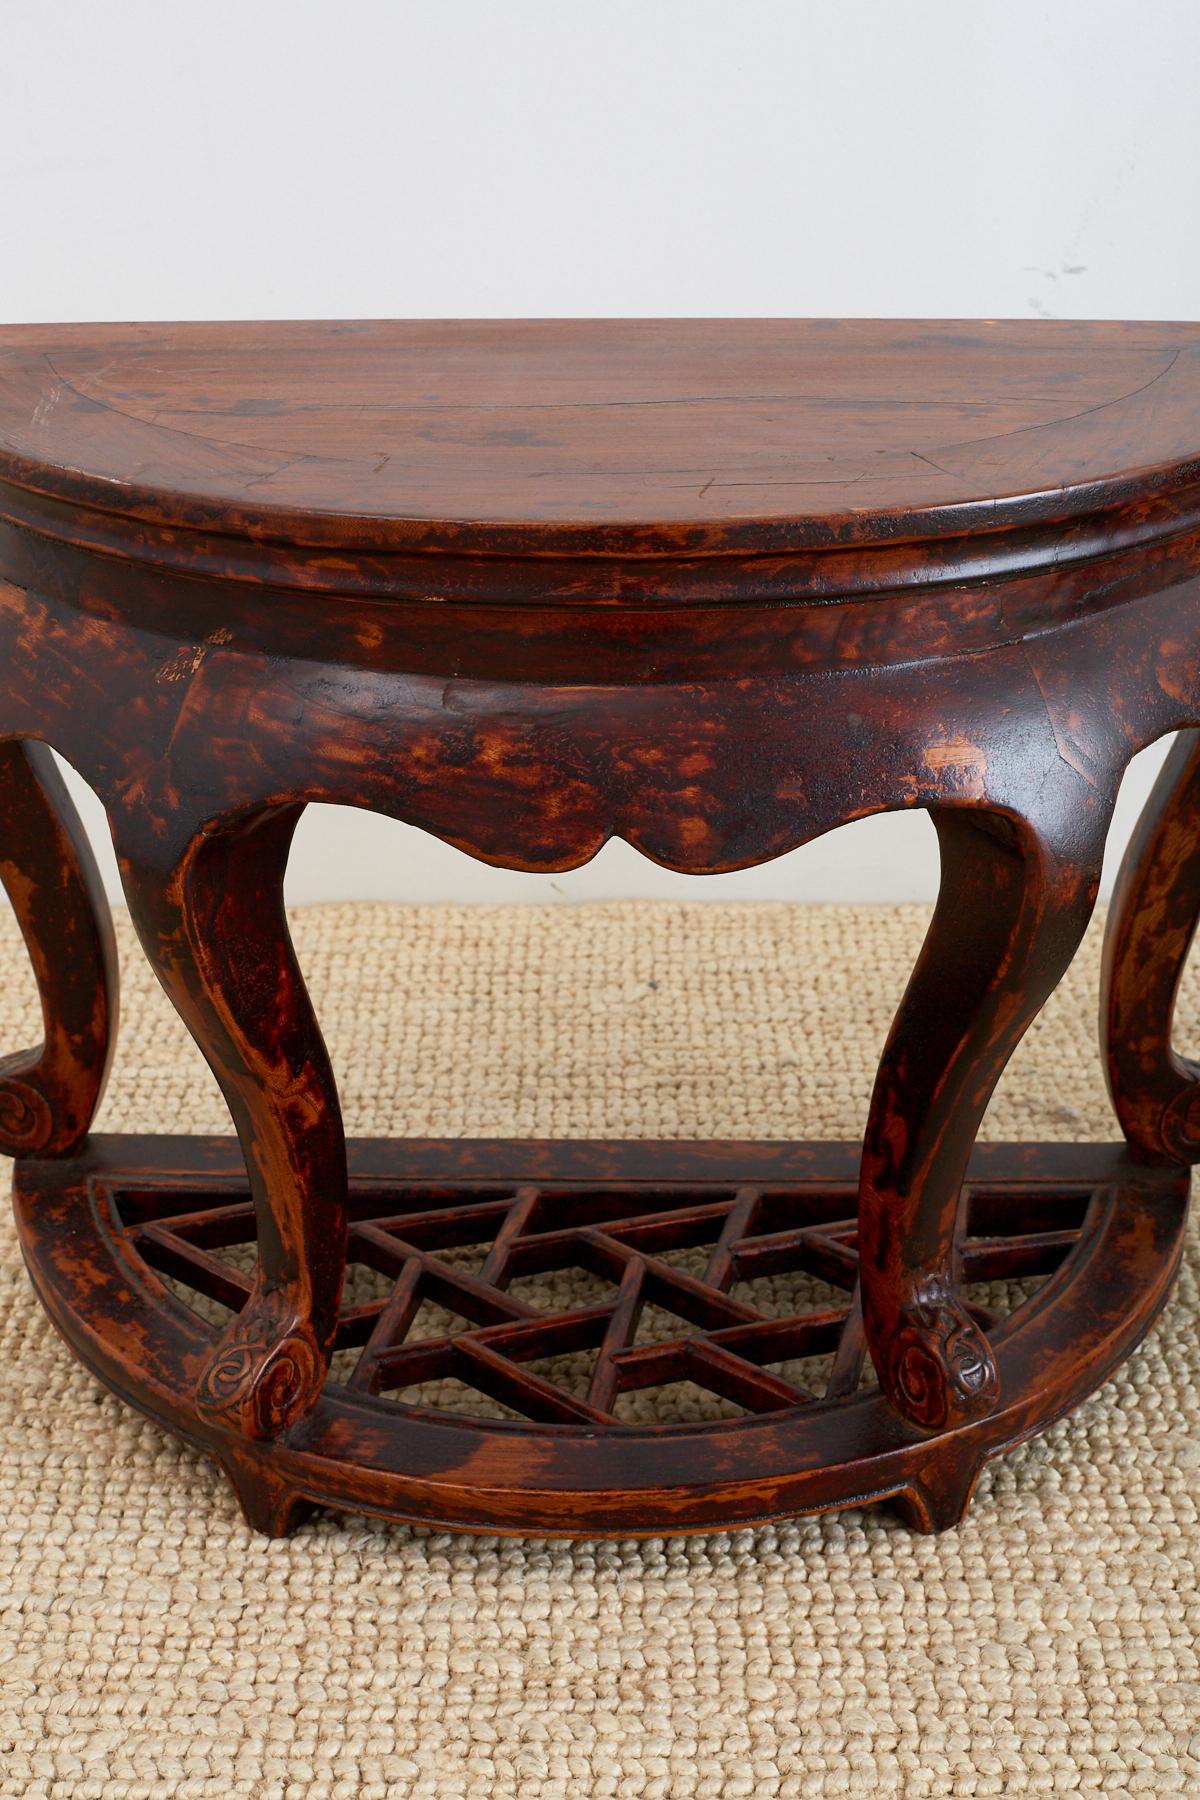 Pair of Chinese Hardwood Carved Demilune Tables In Distressed Condition For Sale In Rio Vista, CA